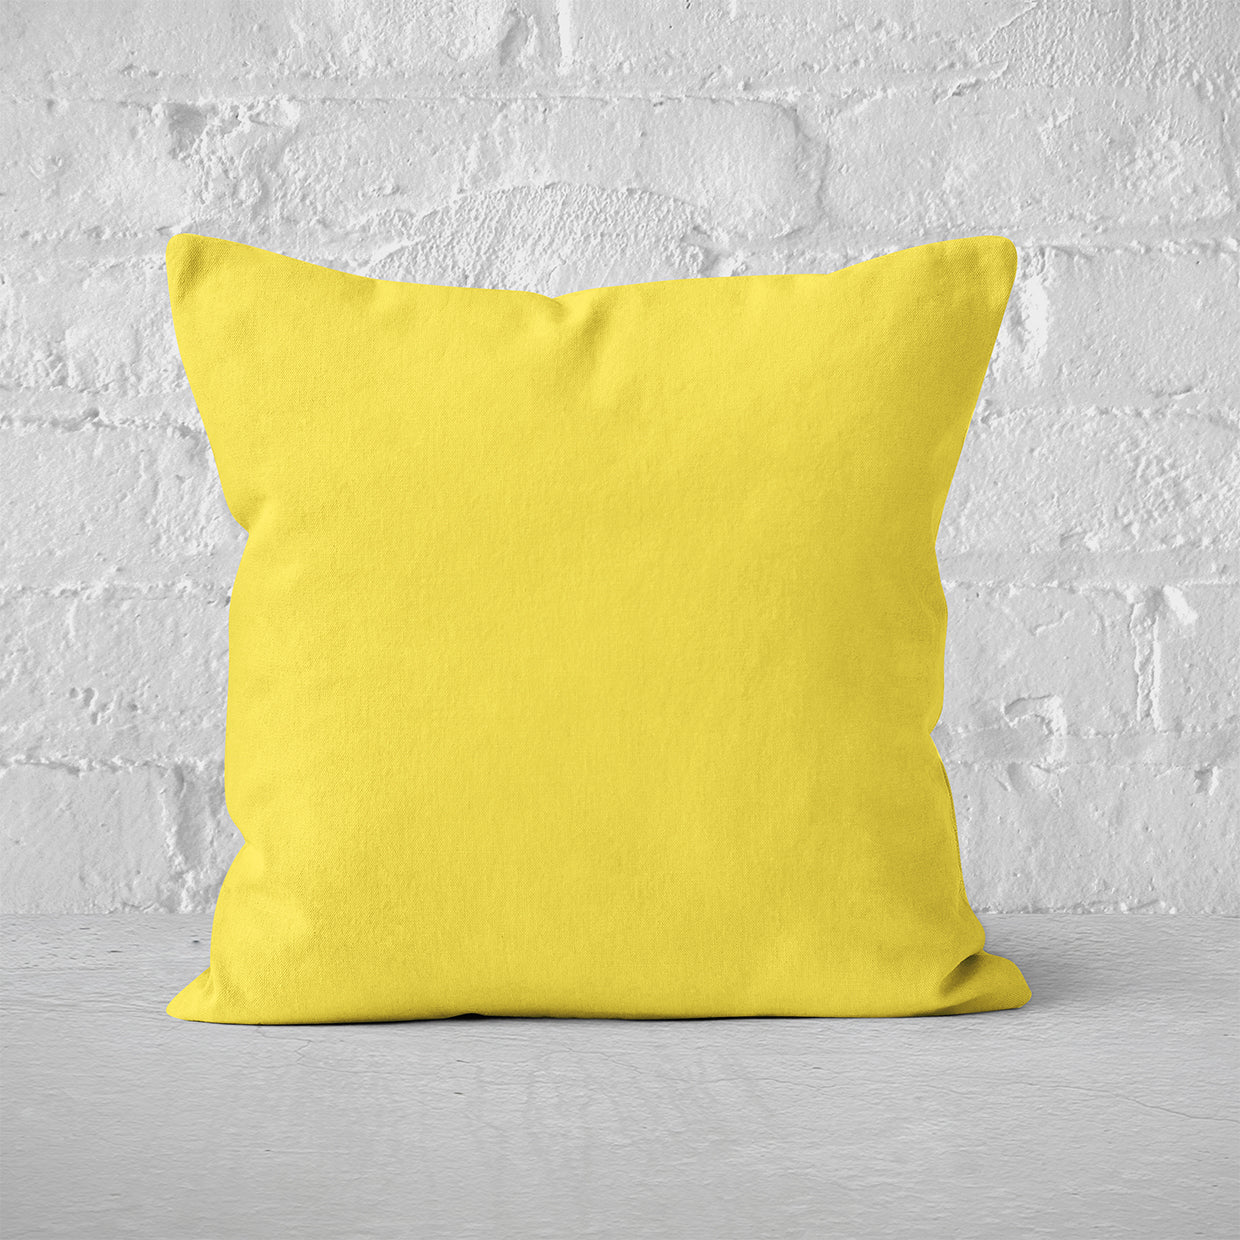 Pillow Cover Art Feature 'Solid' - Yellow - Cotton Twill